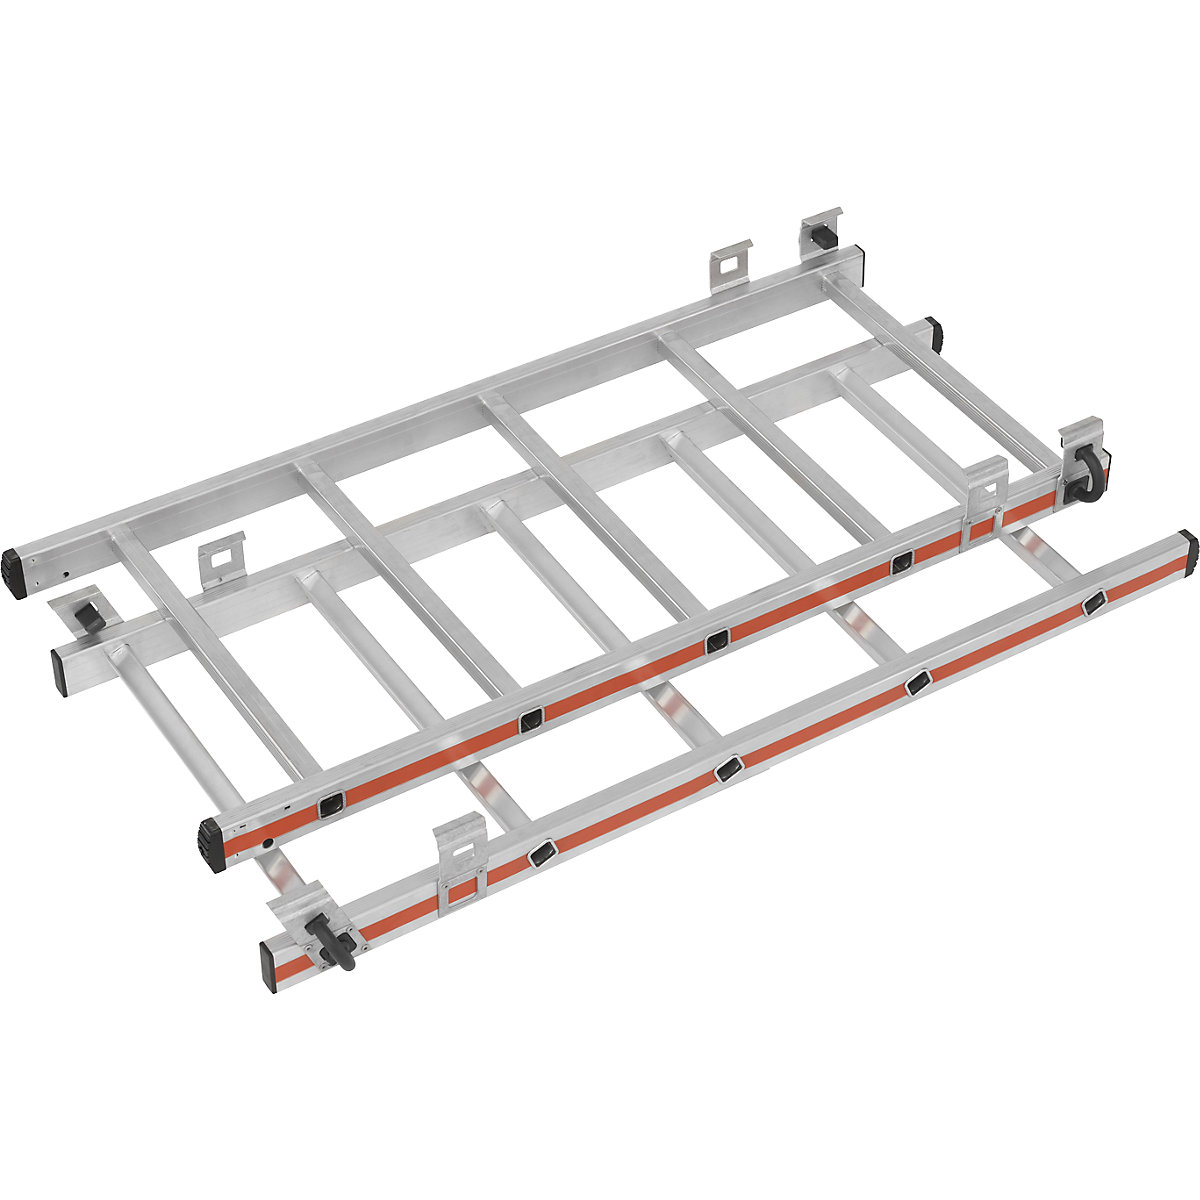 Extension kit for height adjustment – HYMER, for aluminium folding safety steps, 2 x 5 rungs-2